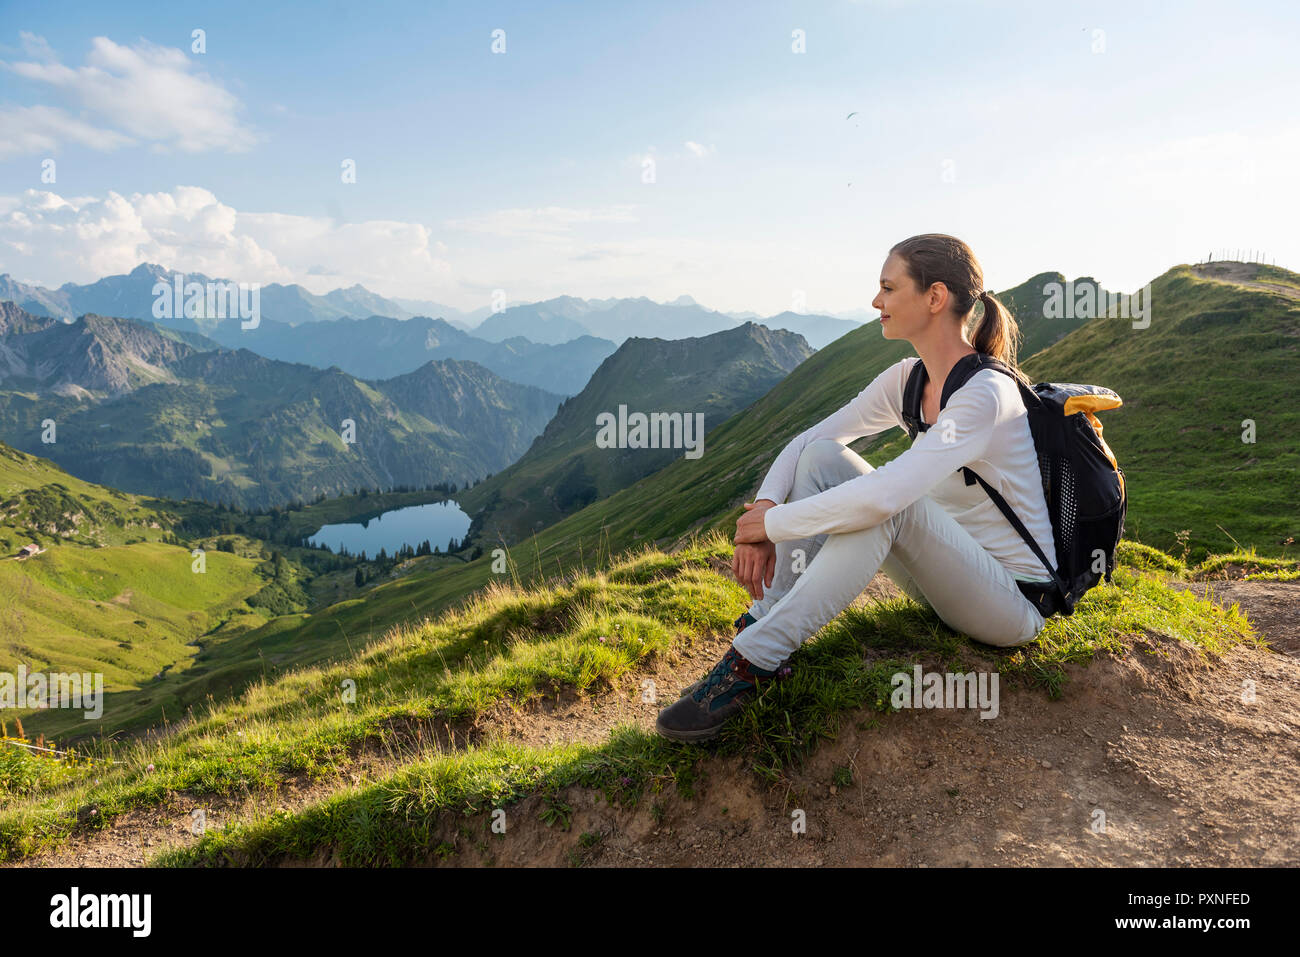 Germany, Bavaria, Oberstdorf, woman on a hike in the mountains having a break Stock Photo